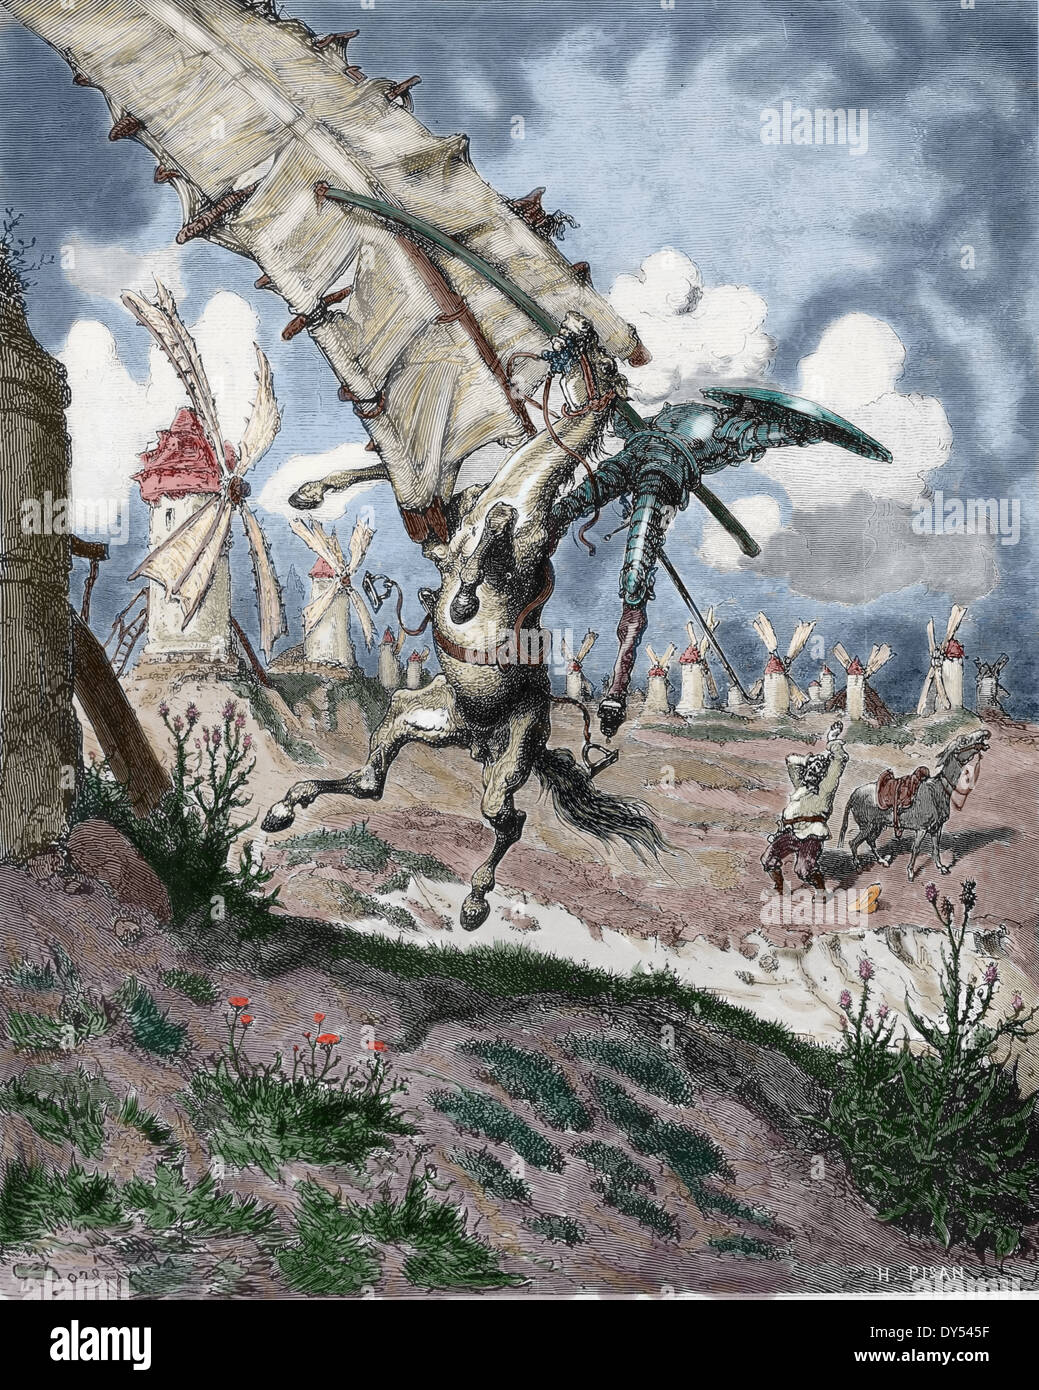 Don Quixote by Miguel de Cervantes. The attack on the windmill. (part I, 8). Illustrated by Gustave Dore (1832-1883) Stock Photo